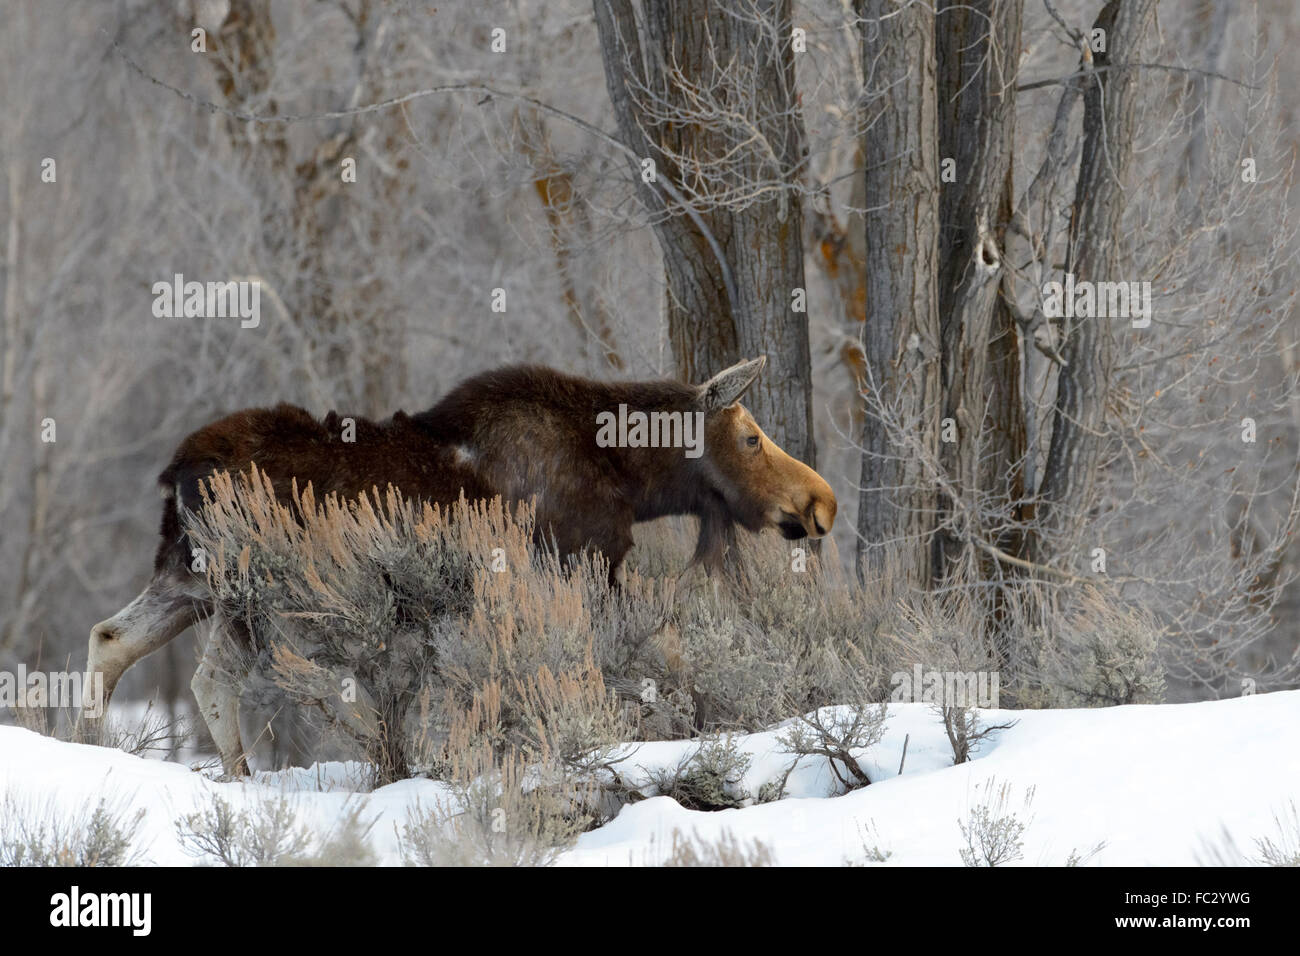 Moose (Alces alces) foraging in snow with cottonwood trees, Grand Teton National Park, Wyoming Stock Photo